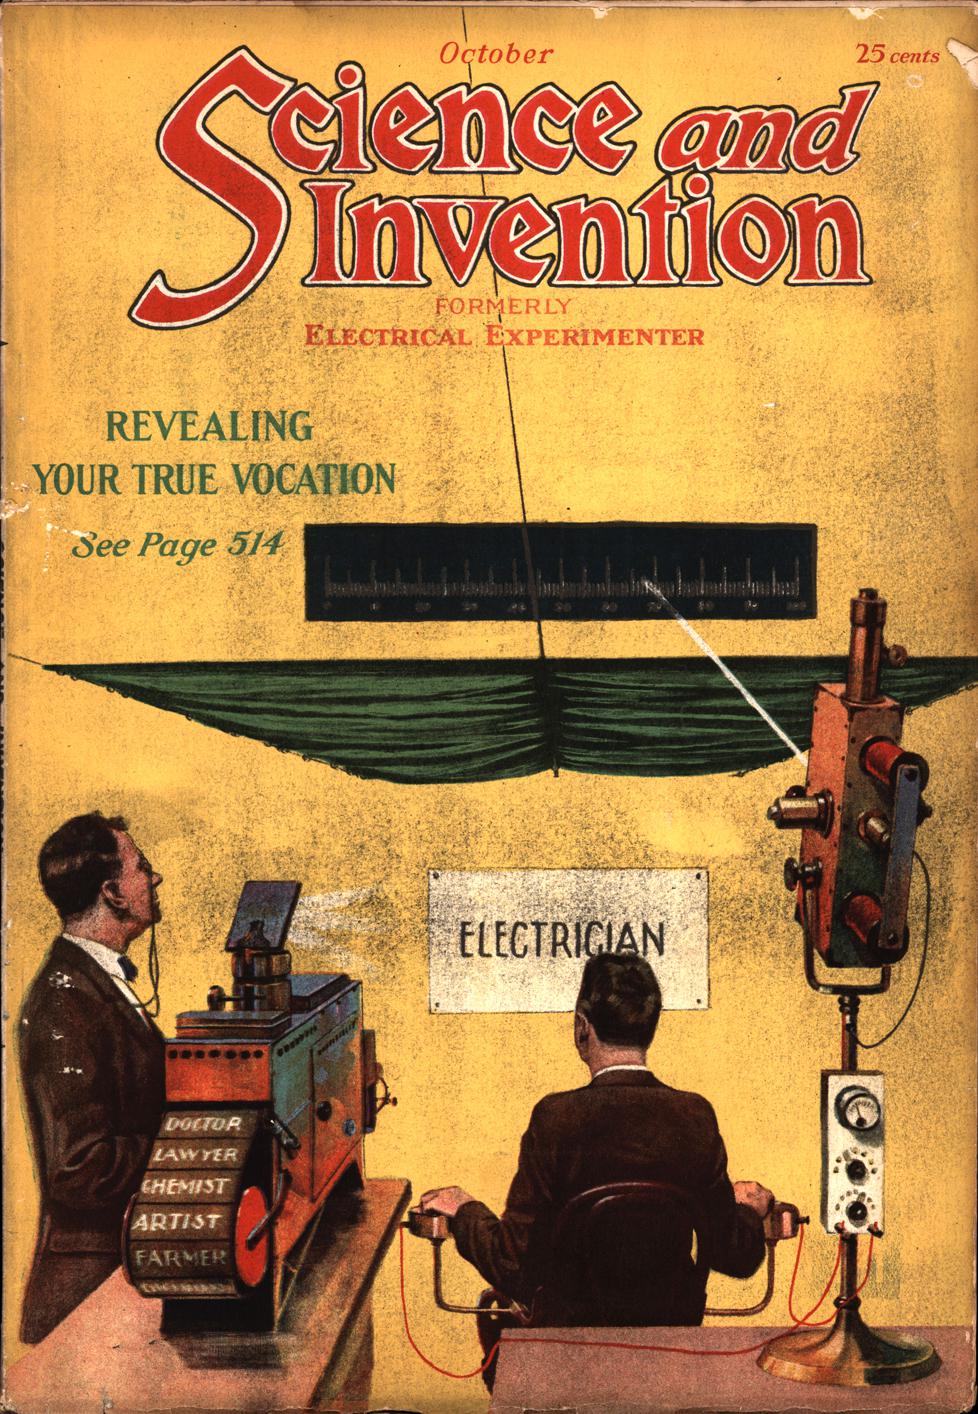 1921 - Science and invention - Vol. 9, No. 6